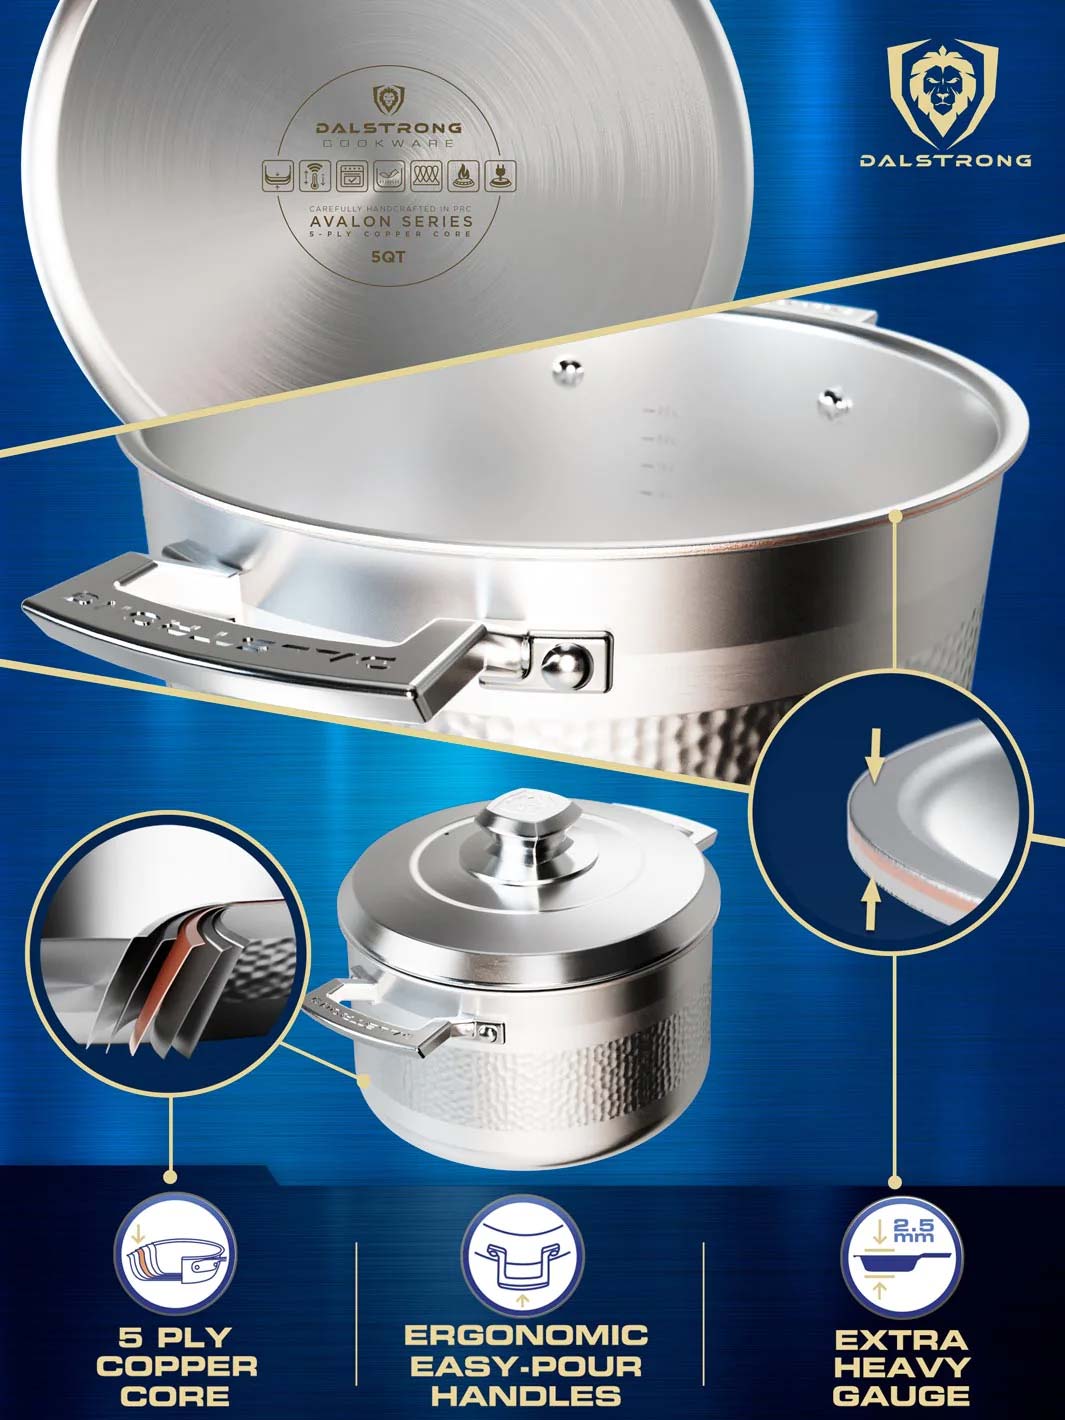 Dalstrong avalon series 5 quart stock pot hammered finish silver featuring it's 5 ply copper core and handles.